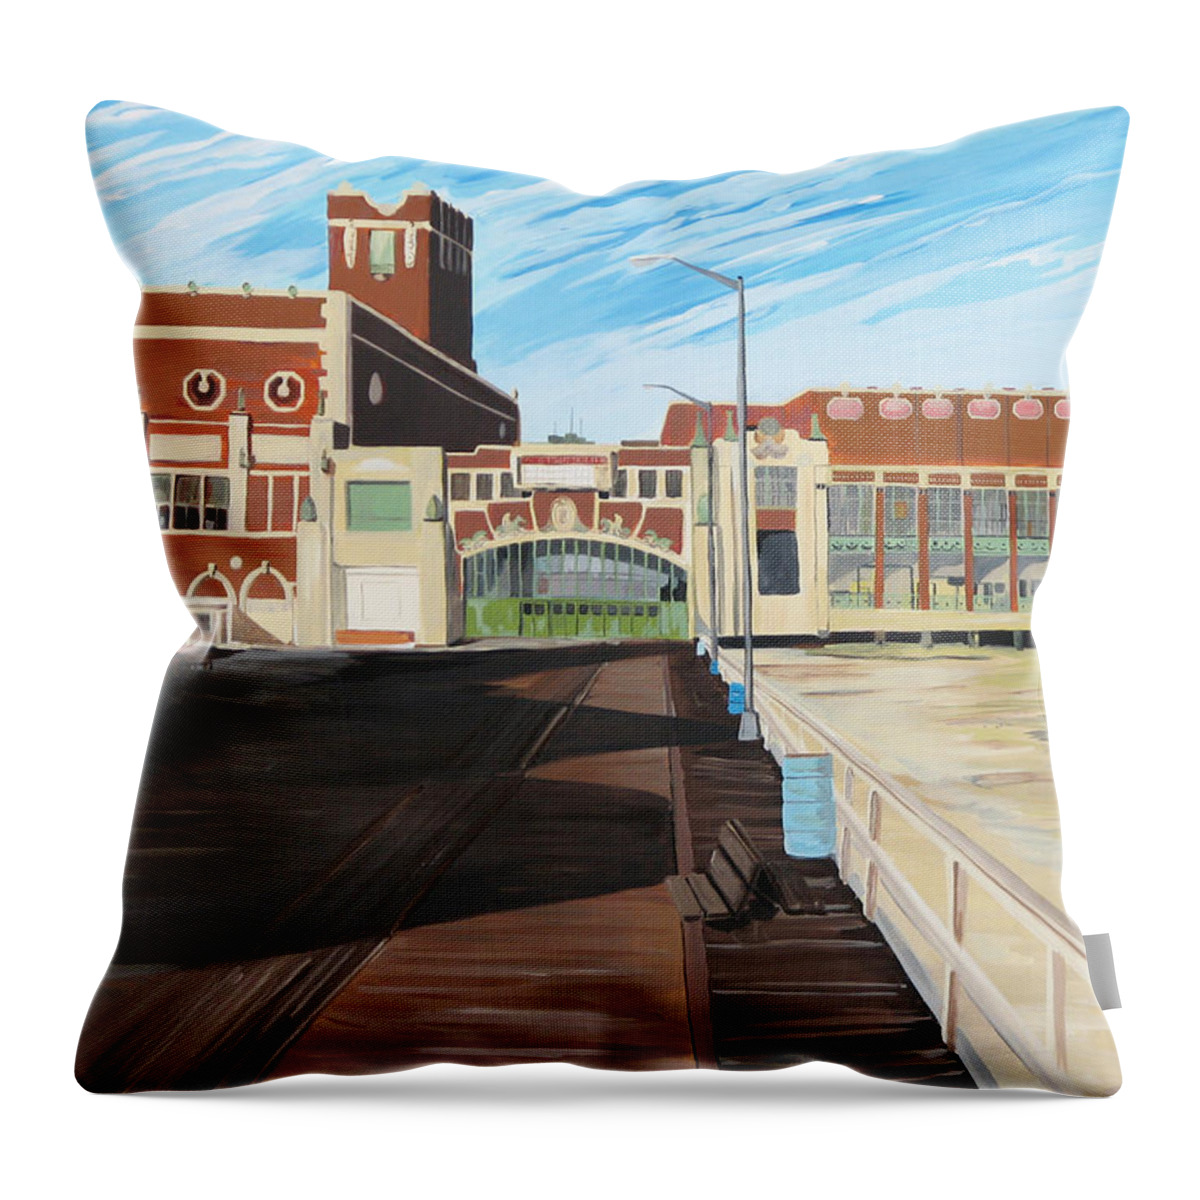 Asbury Art Throw Pillow featuring the painting The Convention Hall Asbury Park by Patricia Arroyo